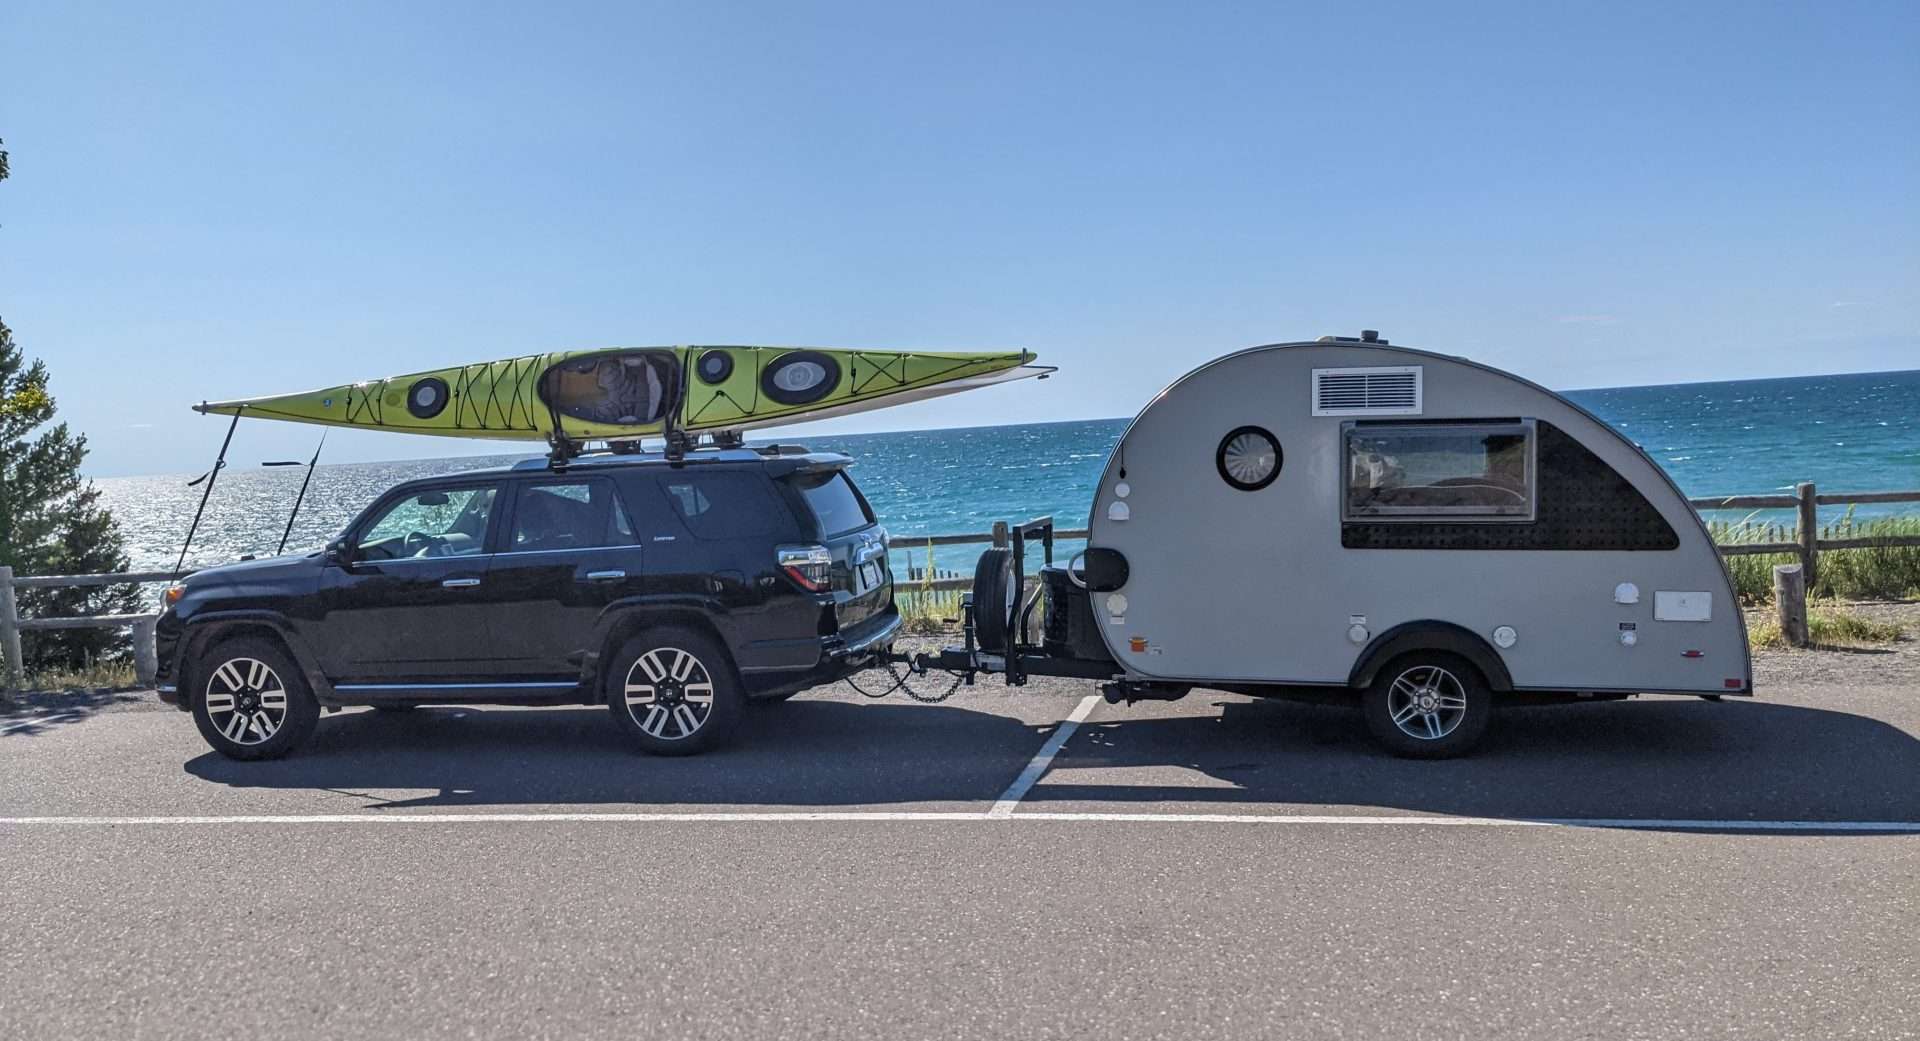 Teardrop trailer hitched with adjustable hitch